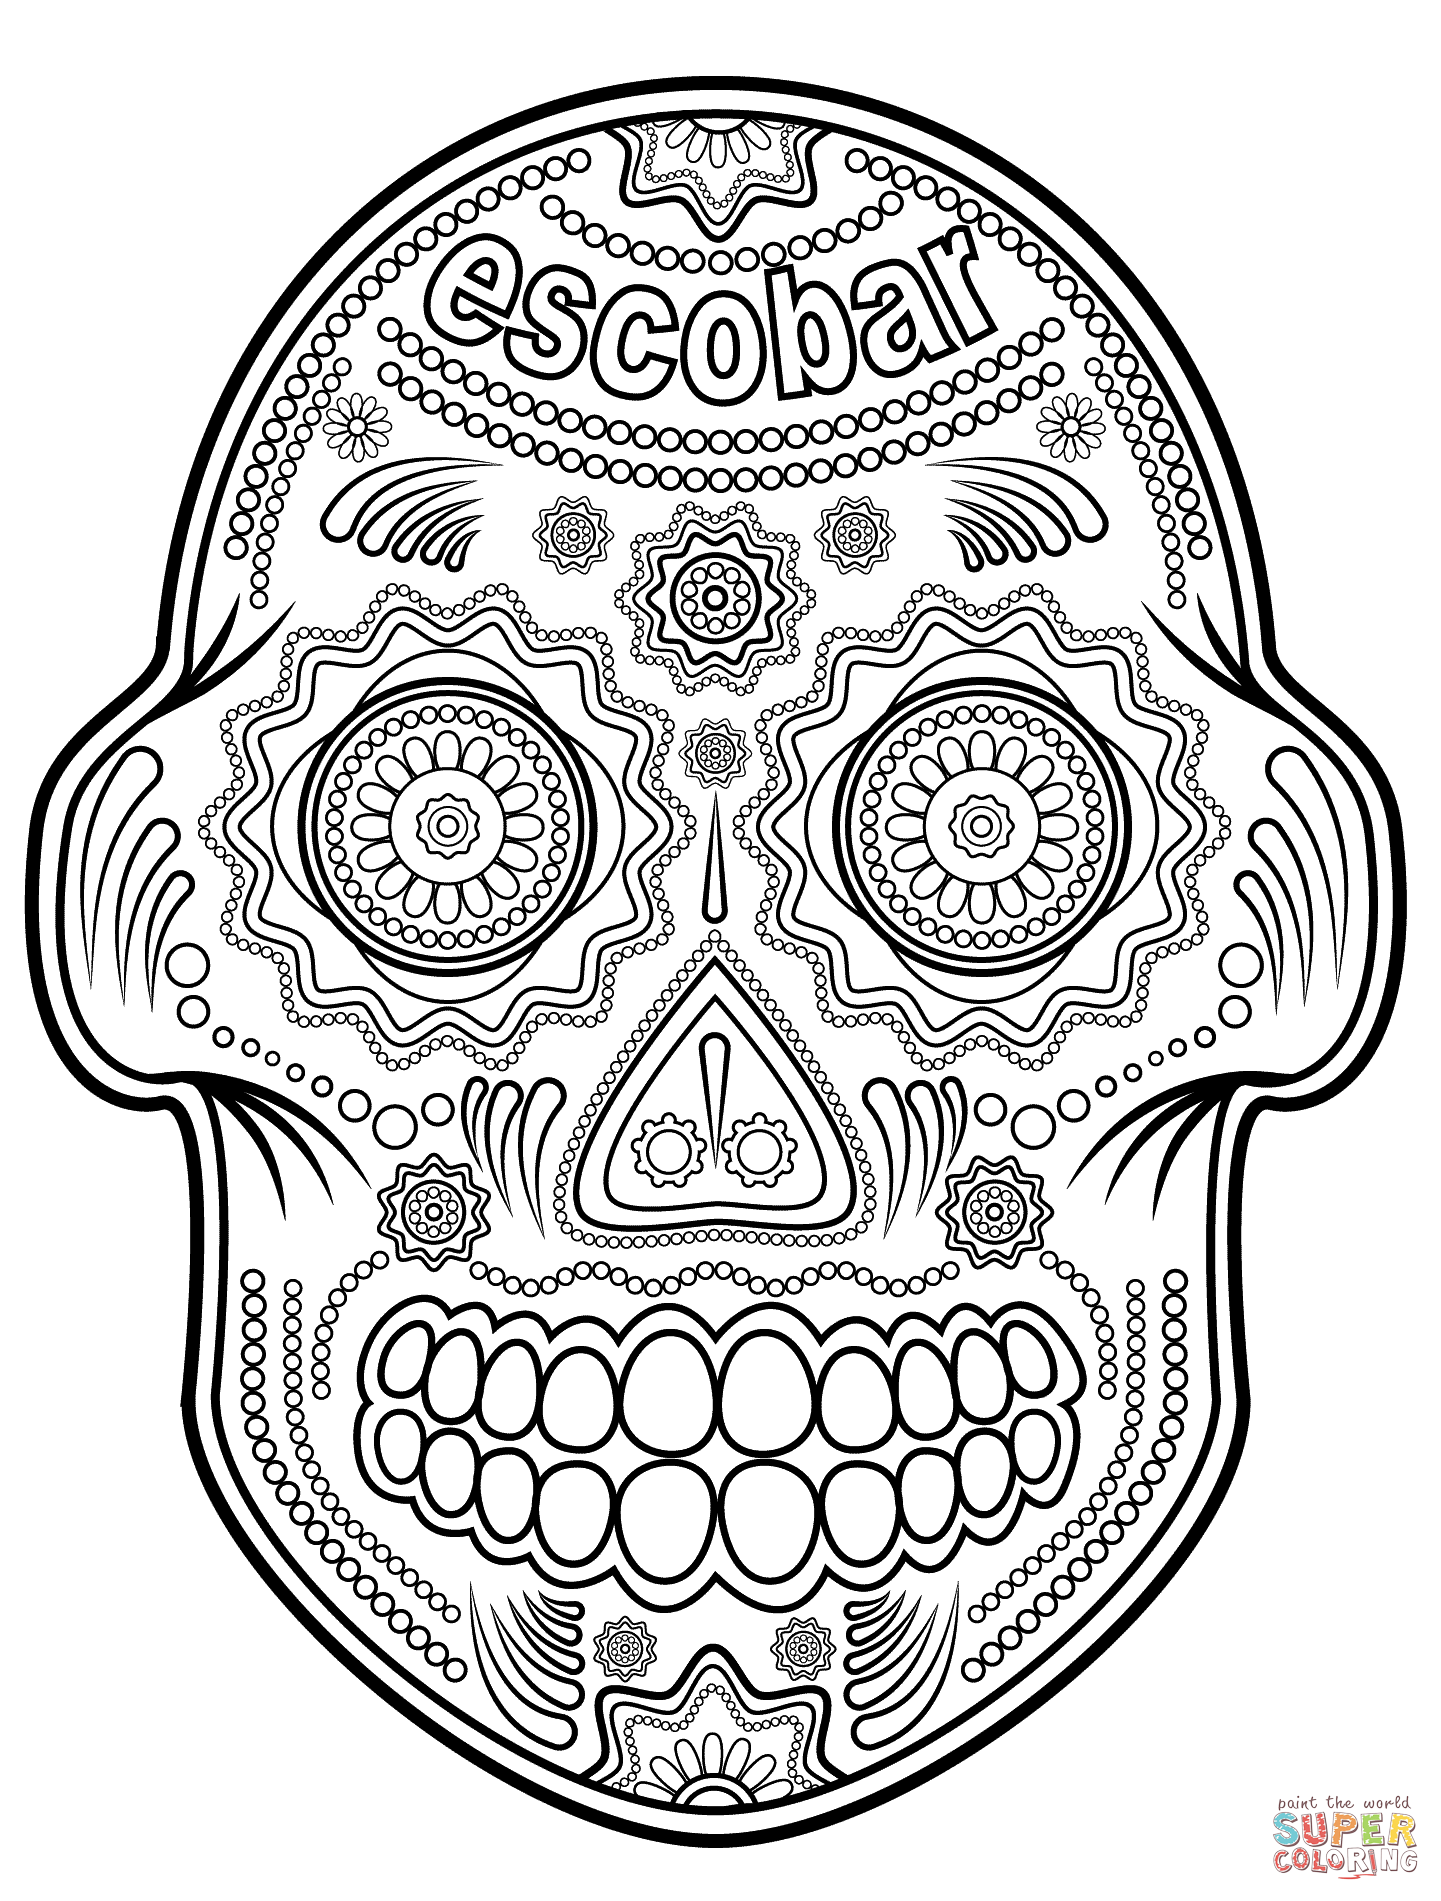 Sugar Skulls coloring pages | Free Coloring Pages